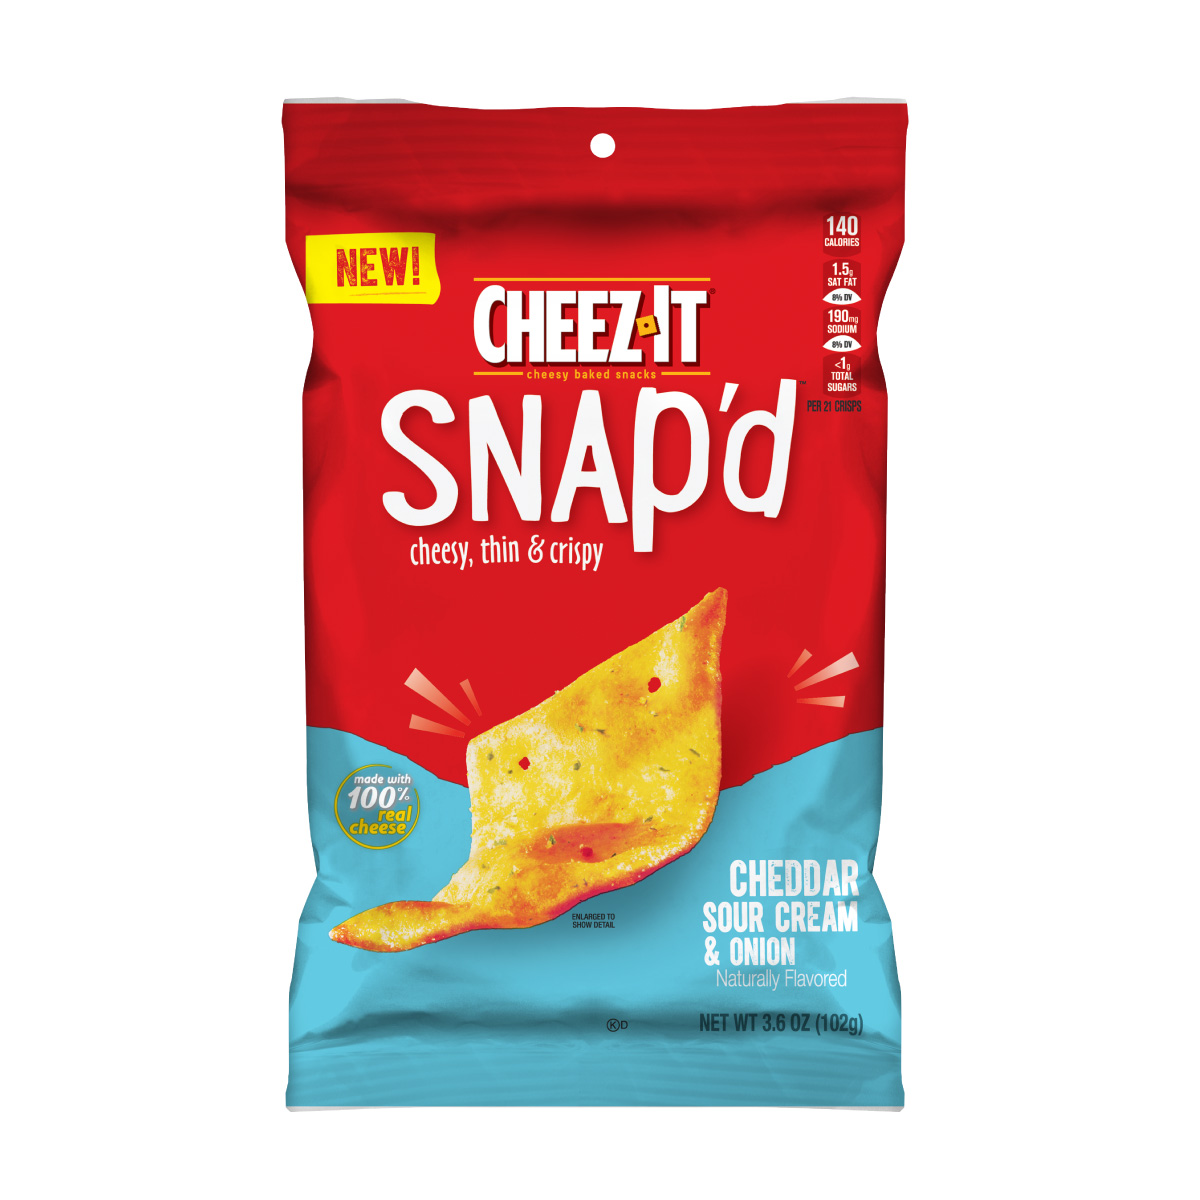 Cheeze-it Snapd Cheddar Sour Cream Onion snacks malaysia